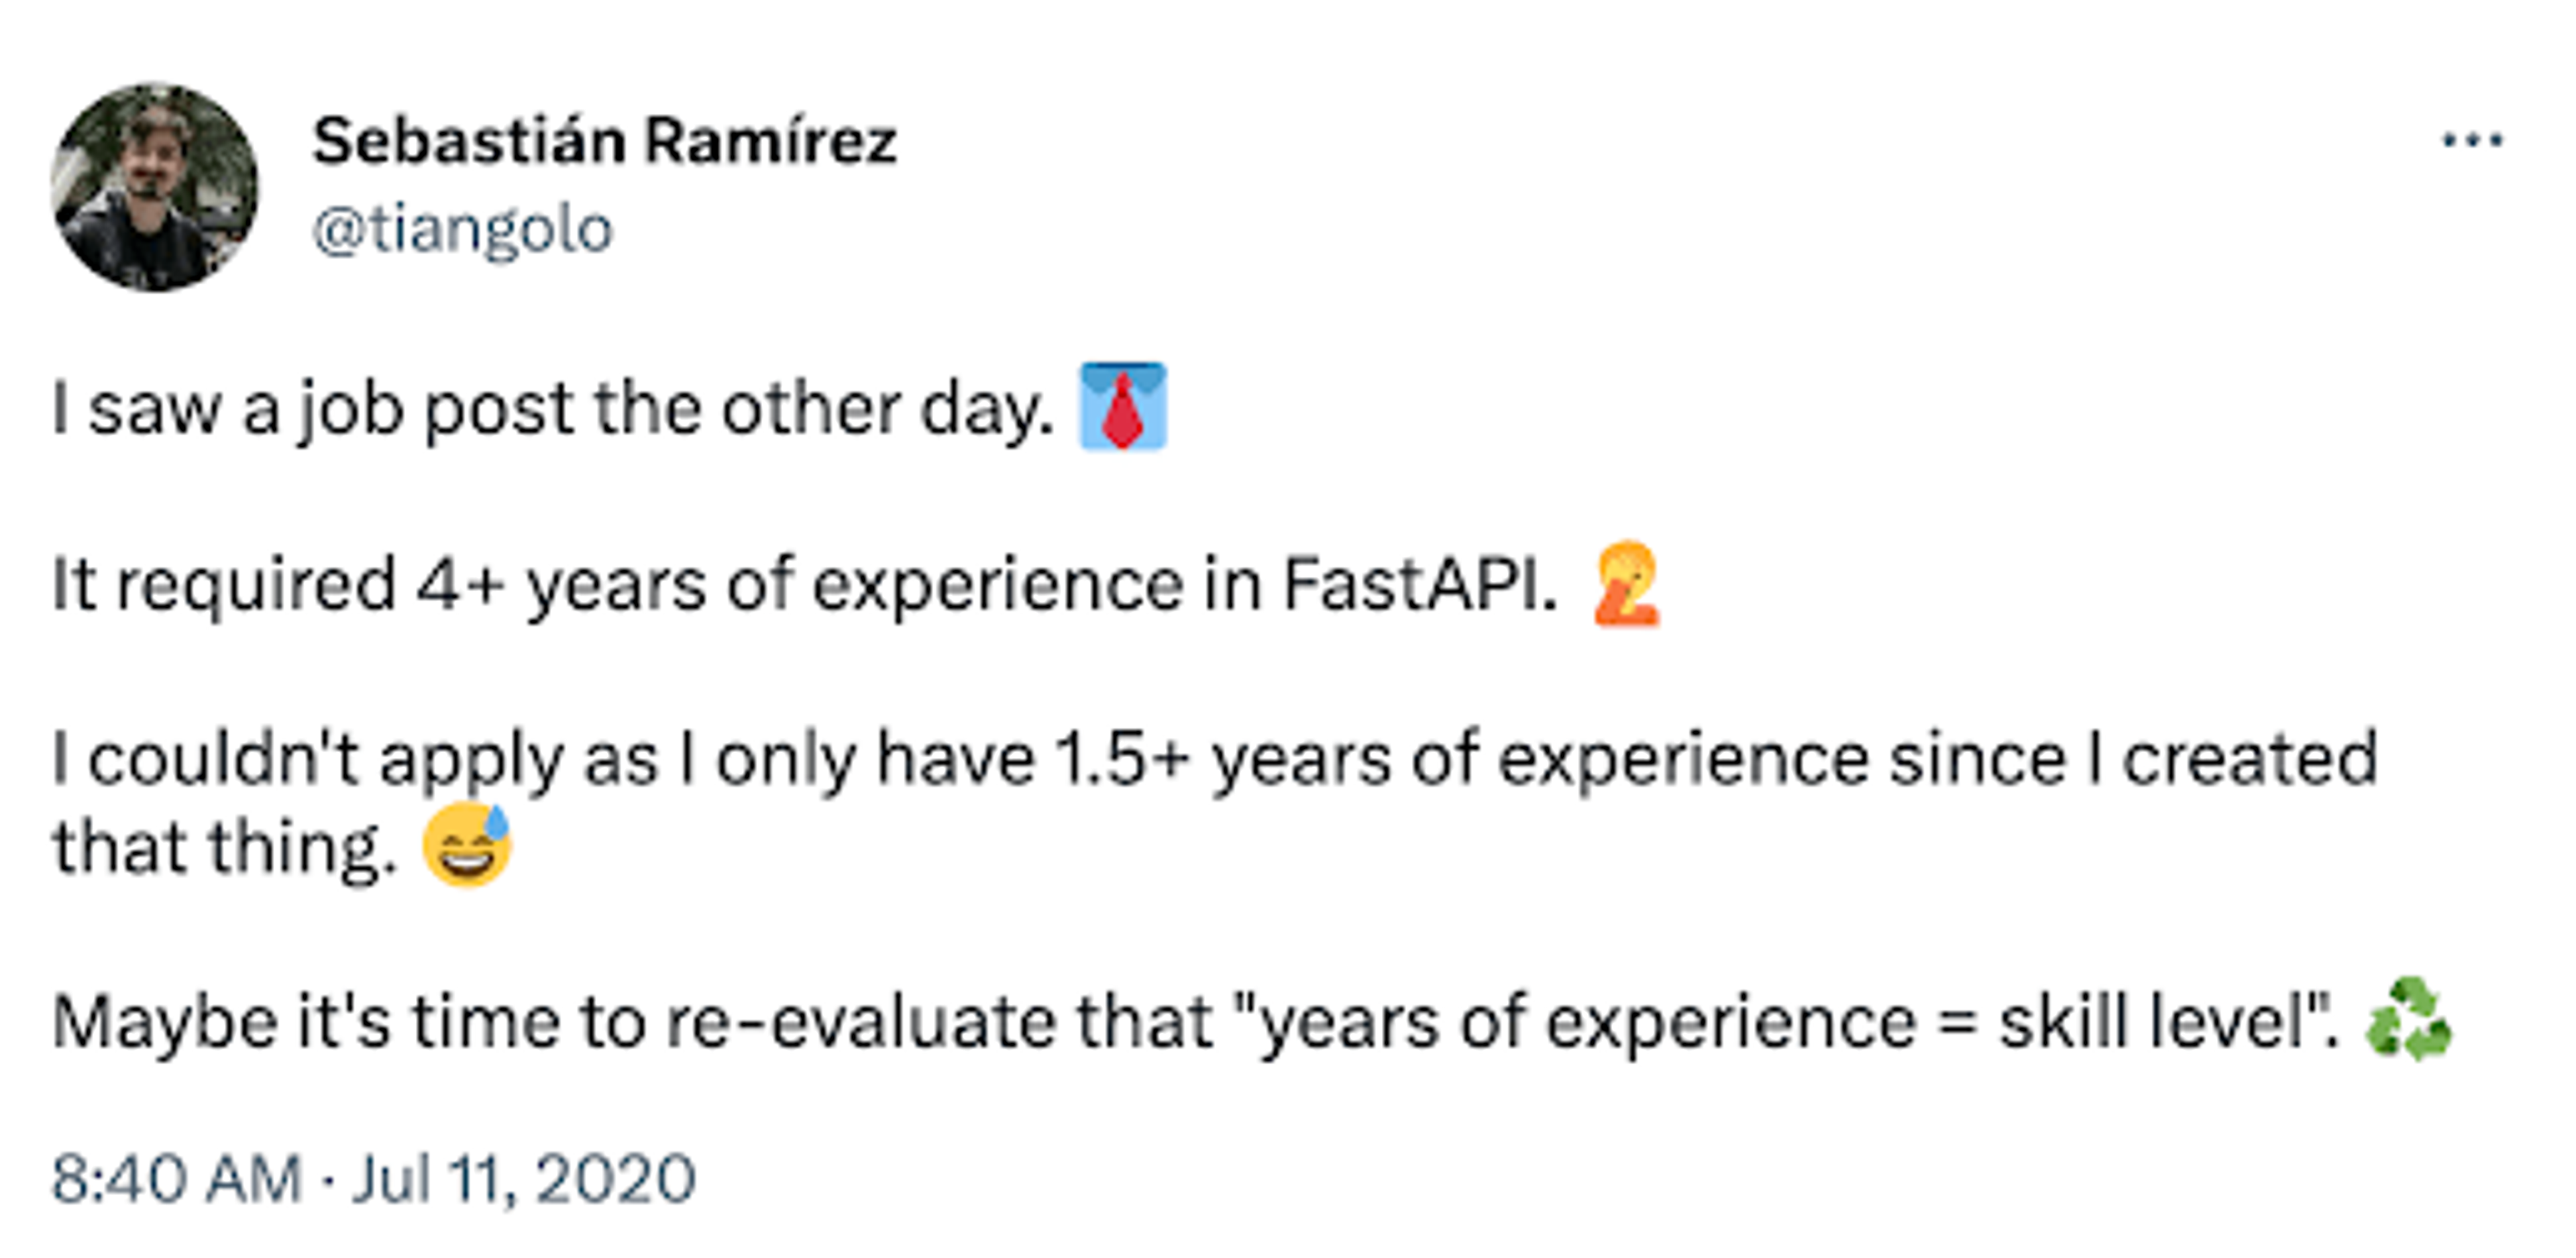 Tweet: "I saw a job post the other day. It required 4+ years of experience in FastAPI. I couldn't apply as I only have 1.5+ years of experience since I created that thing. Maybe it's time to re-evaluate that "years of experience=skill level."